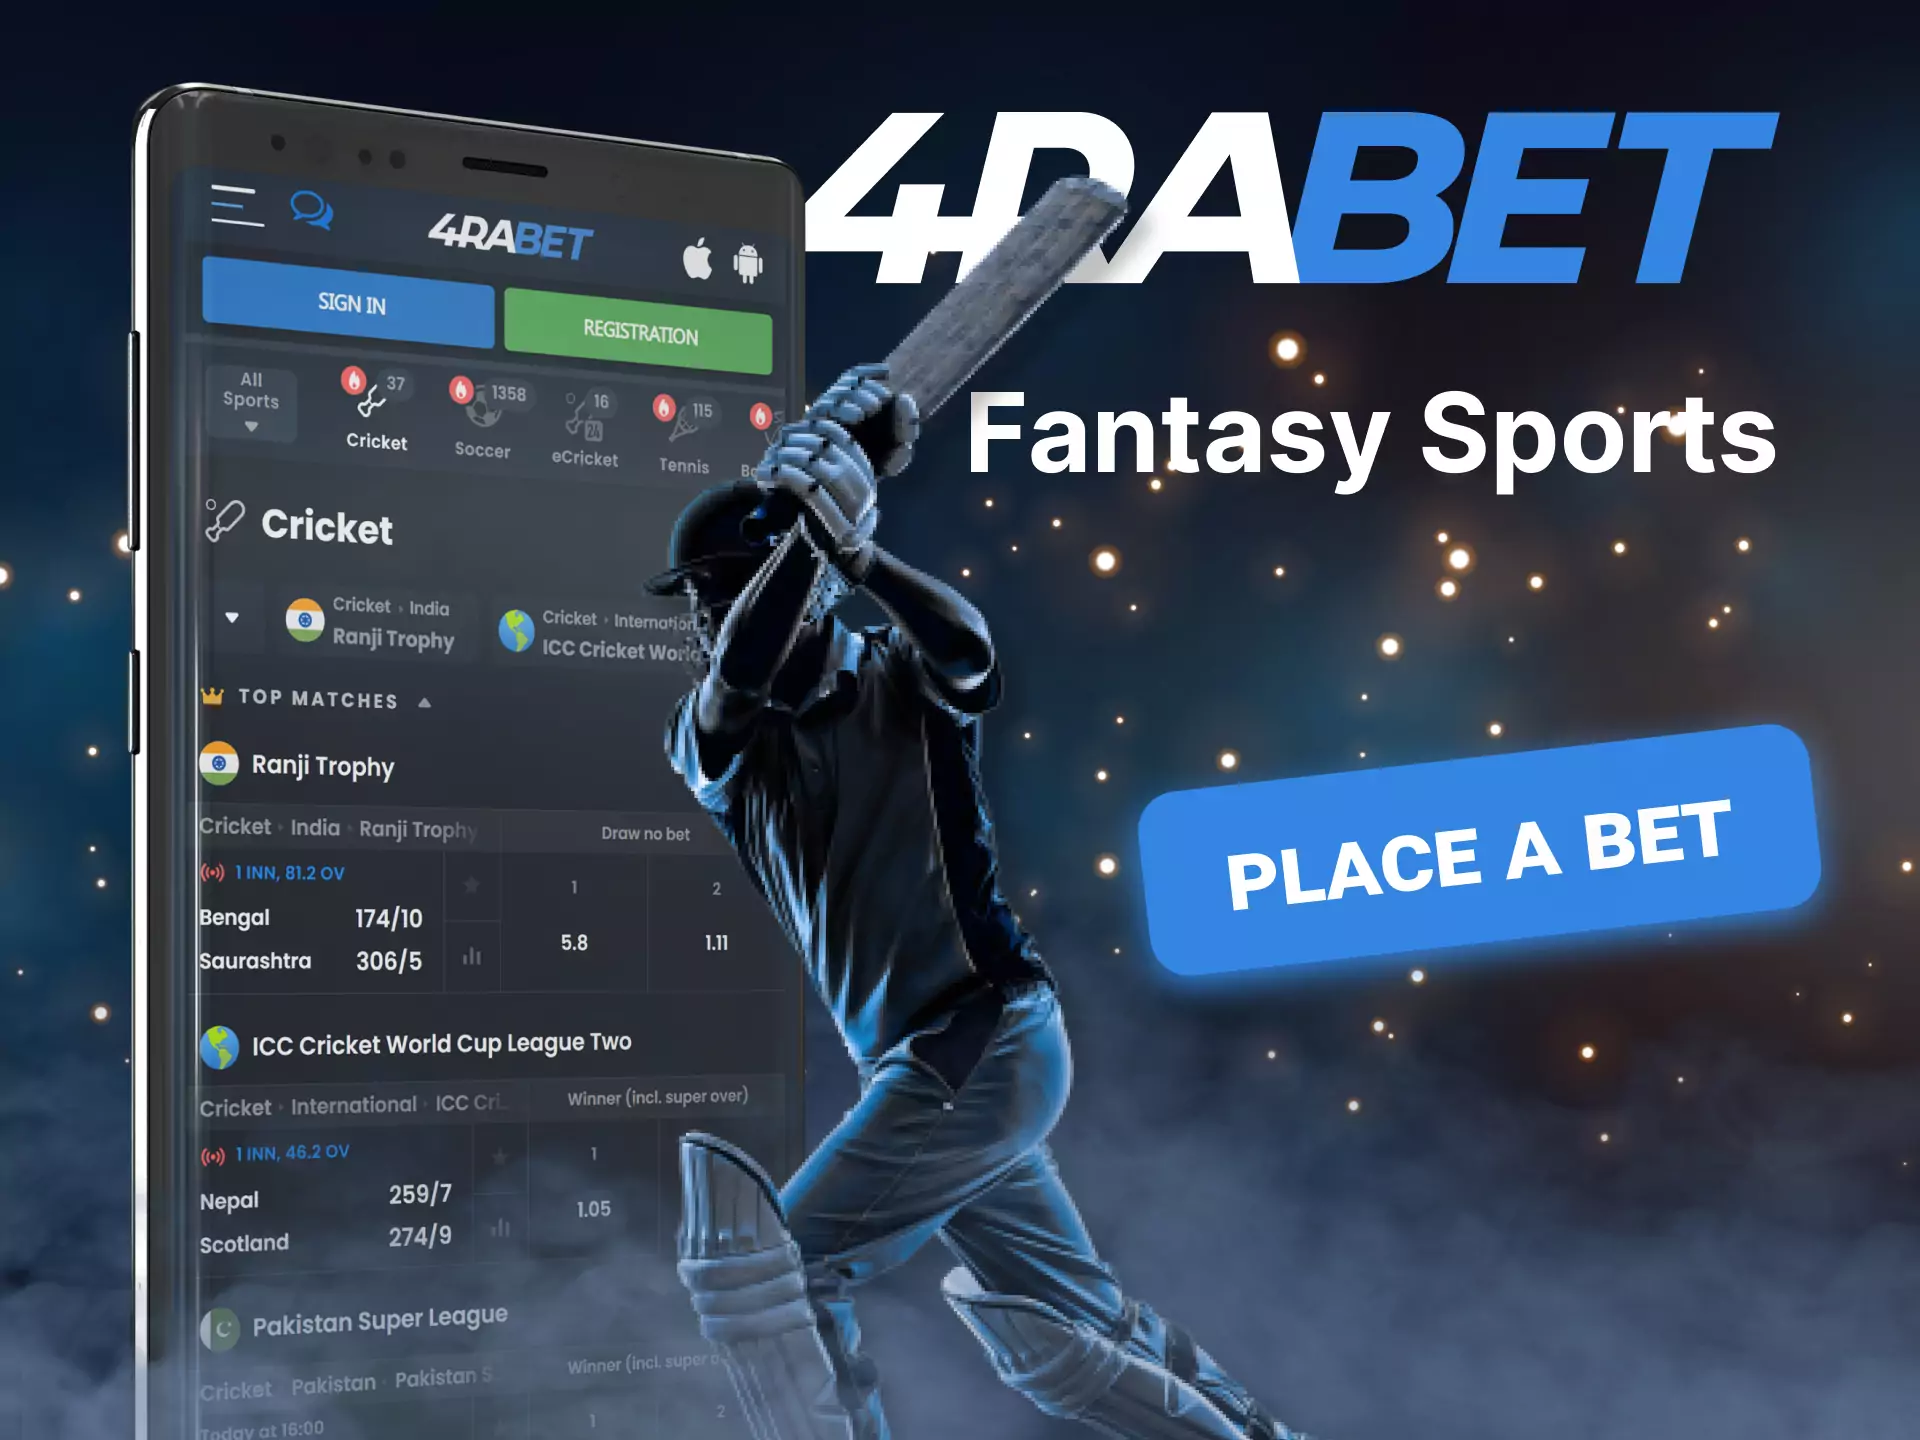 In the 4rabet mobile app, bet on fantasy sports.